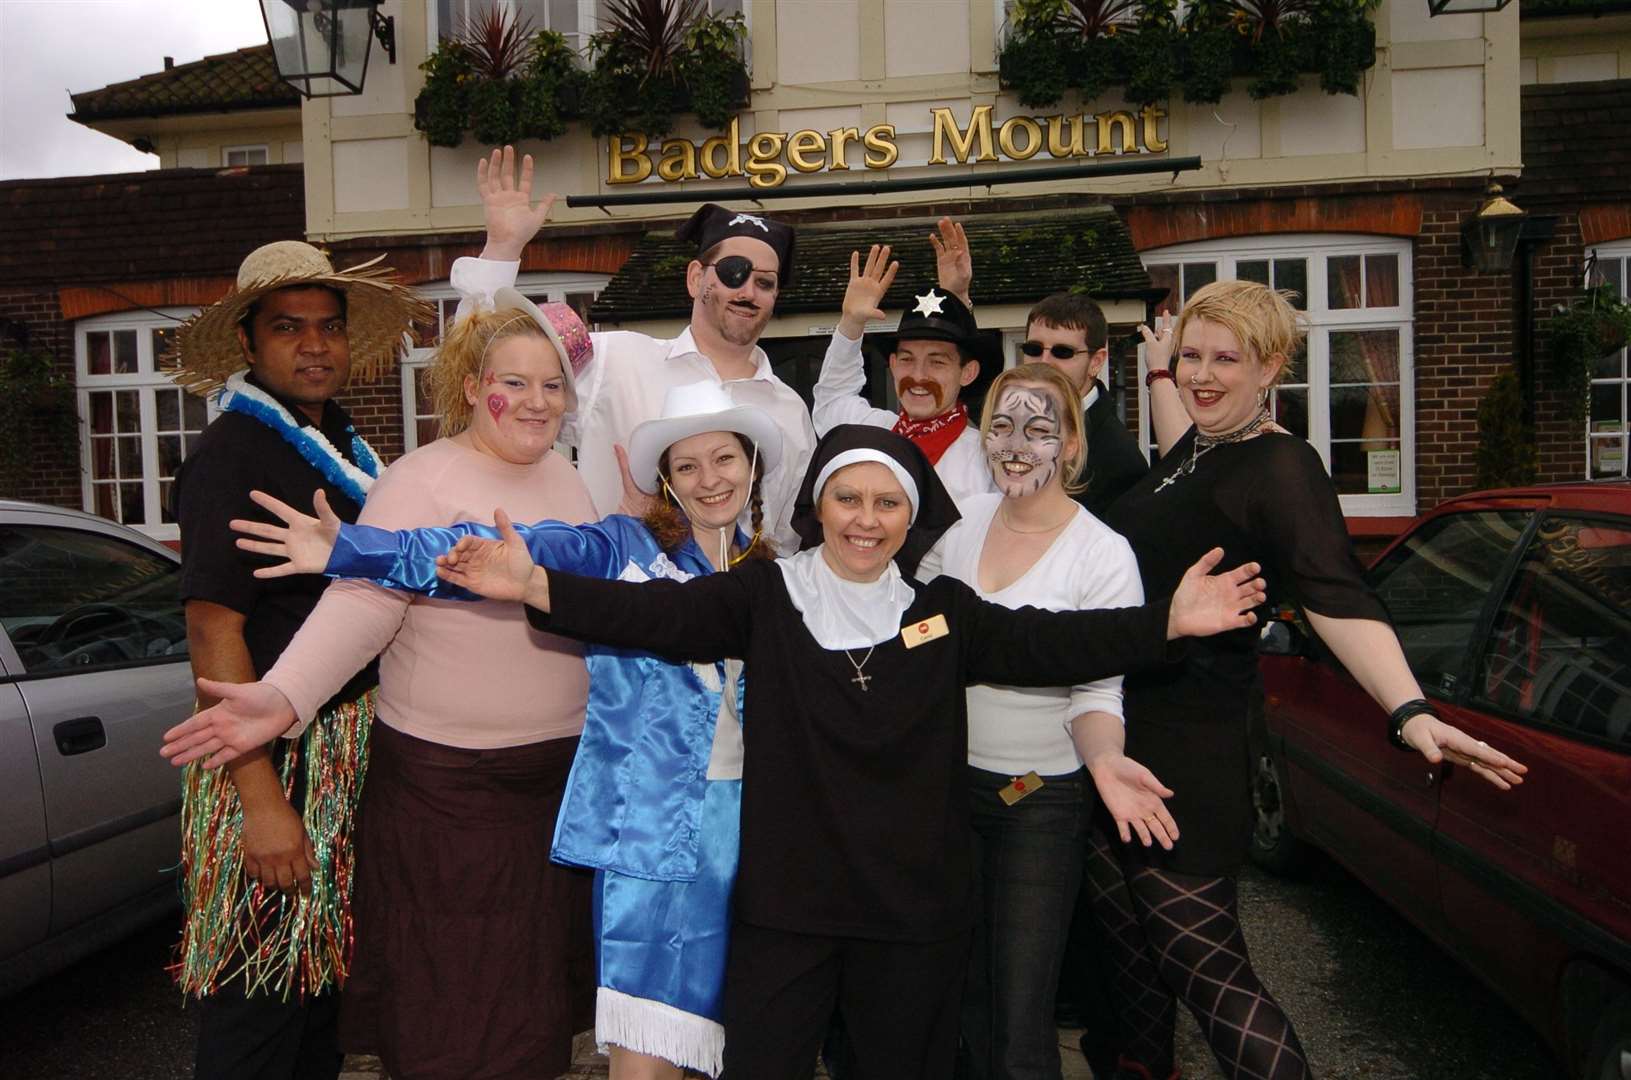 Staff at the Badgers Mount pub in Halstead, Sevenoaks, dress up for a fun day to raise money for the Tsunami appeal in January 2005. It is now a Toby Carvery